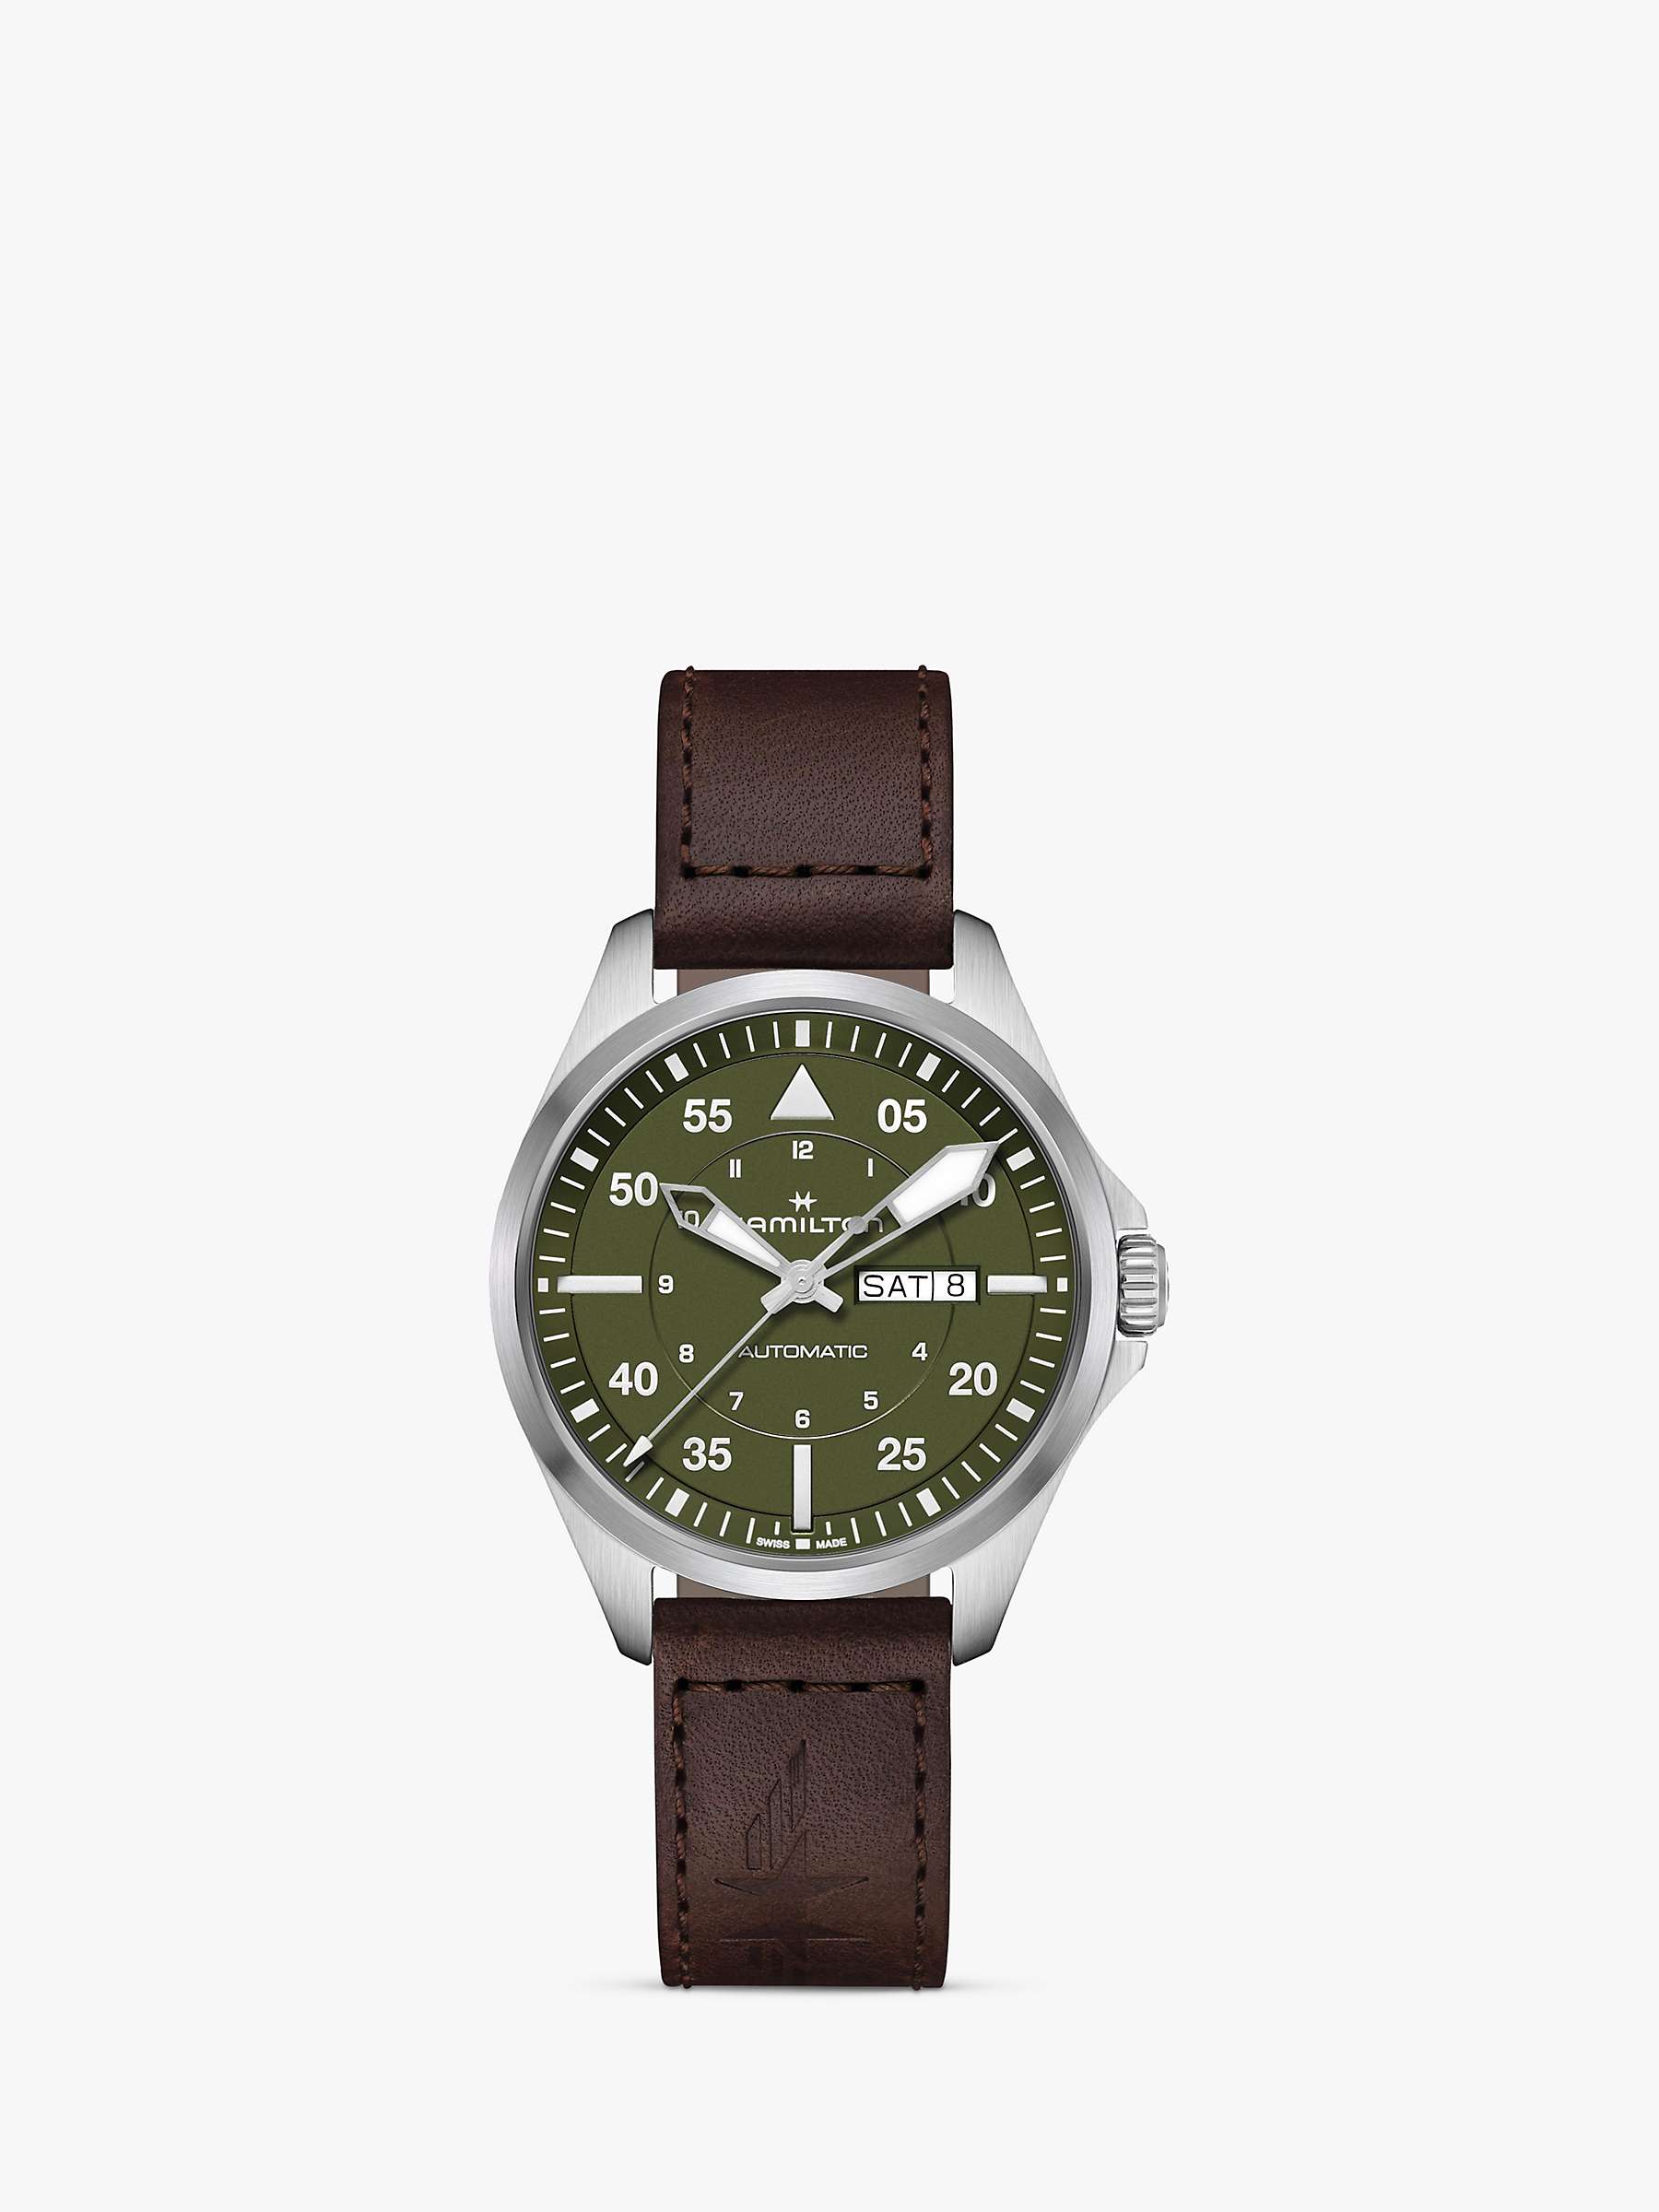 Buy Hamilton H64635560 Men's Khaki Aviation Pilot Day Date Automatic Leather Strap Watch, Green/Brown Online at johnlewis.com